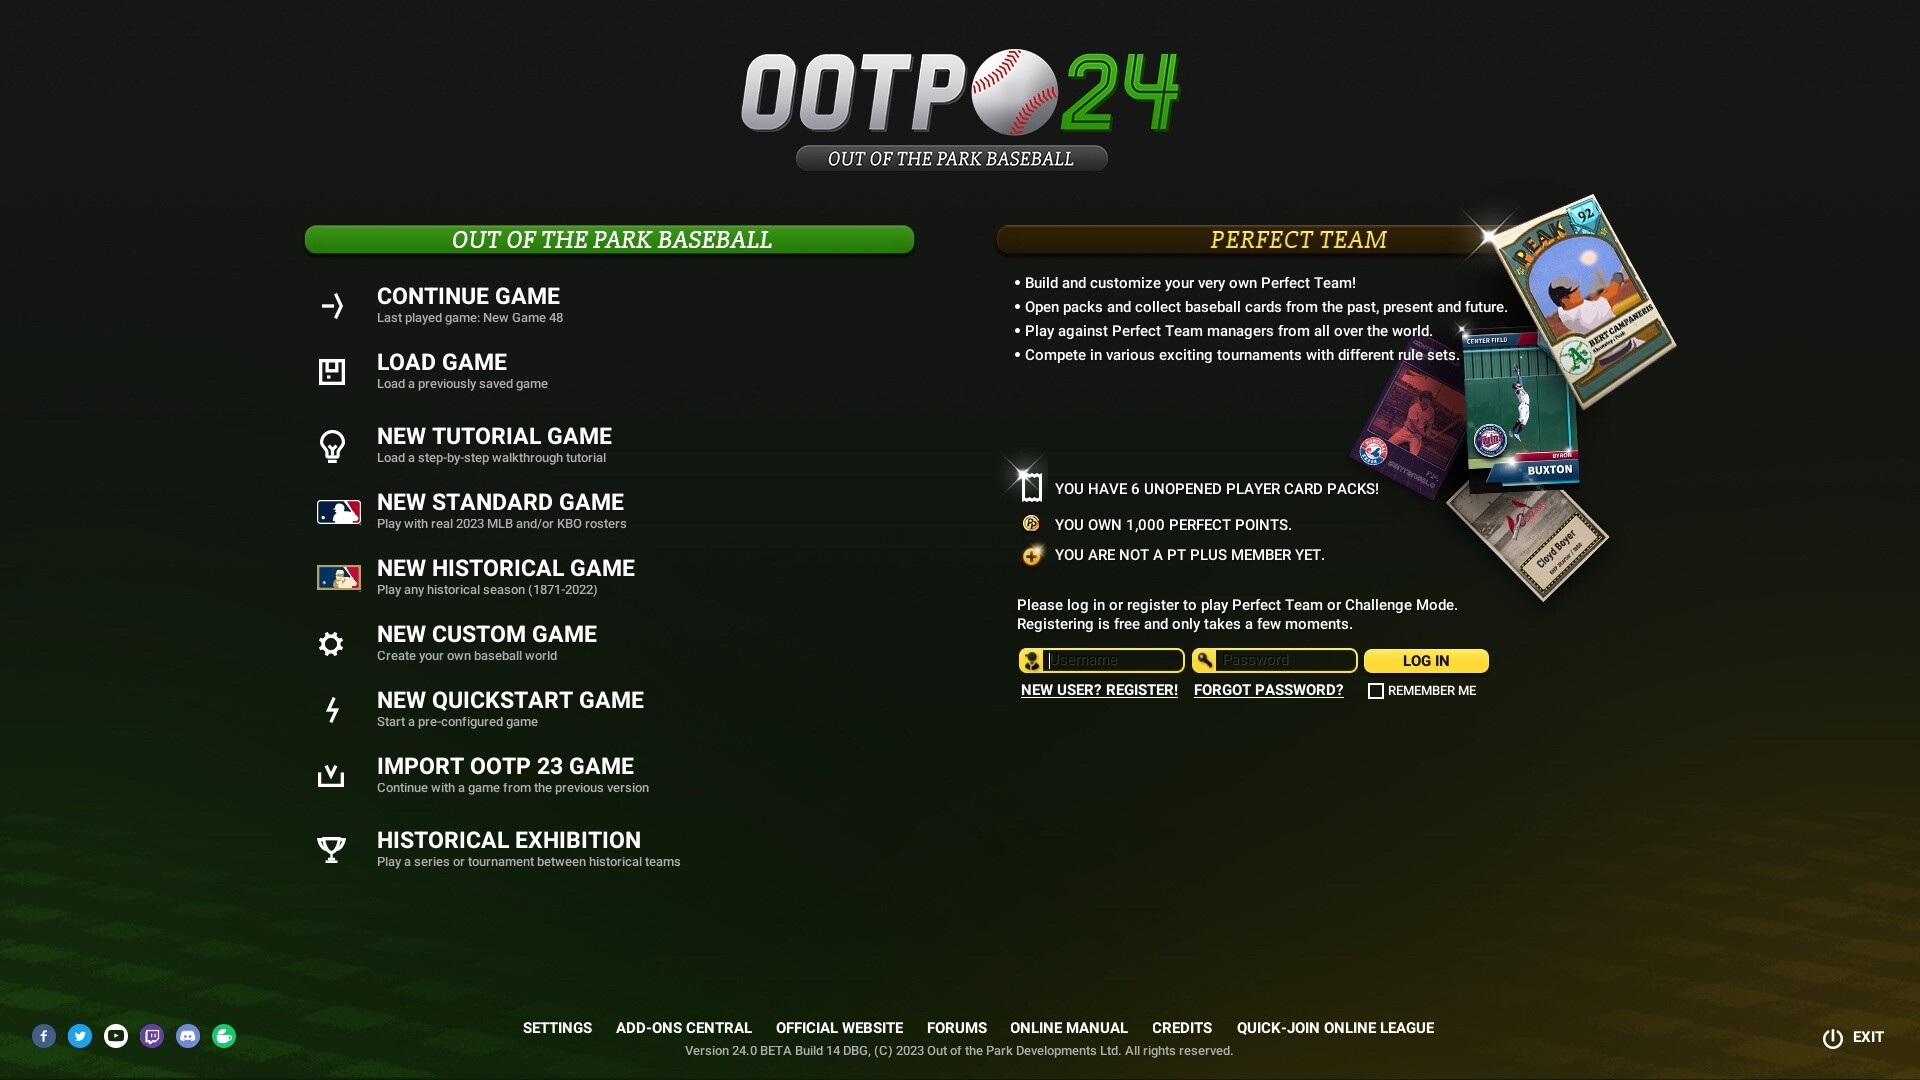 Out of the Park Baseball 24 Steam CD Key 197.49 $